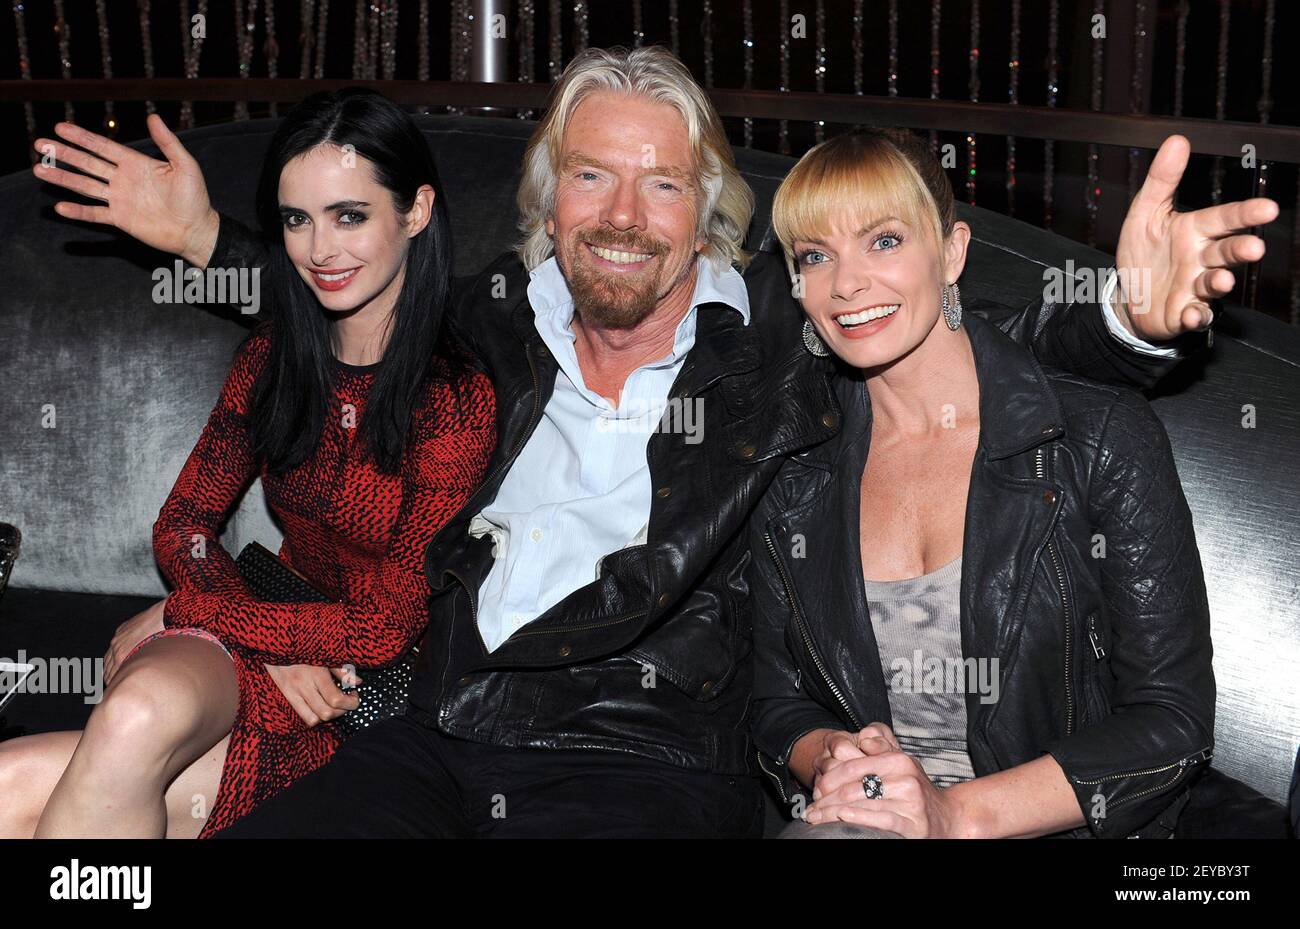 In this photo released by Virgin America Airlines, Virgin Group Founder Sir Richard Branson is joined by actress Jaime Pressly (R) and Krysten Ritter during the launch of new nonstop service from Los Angeles International (LAX) to Las Vegas McCarran International (LAS) Airport, Monday, April 22, 2013 in Las Vegas. The new three daily roundtrip flights from LAX will add to the airline's existing service from San Francisco and New York to Las Vegas McCarran. (Photo by Bob Riha, Jr./Virgin America/Sipa USA) Stock Photo